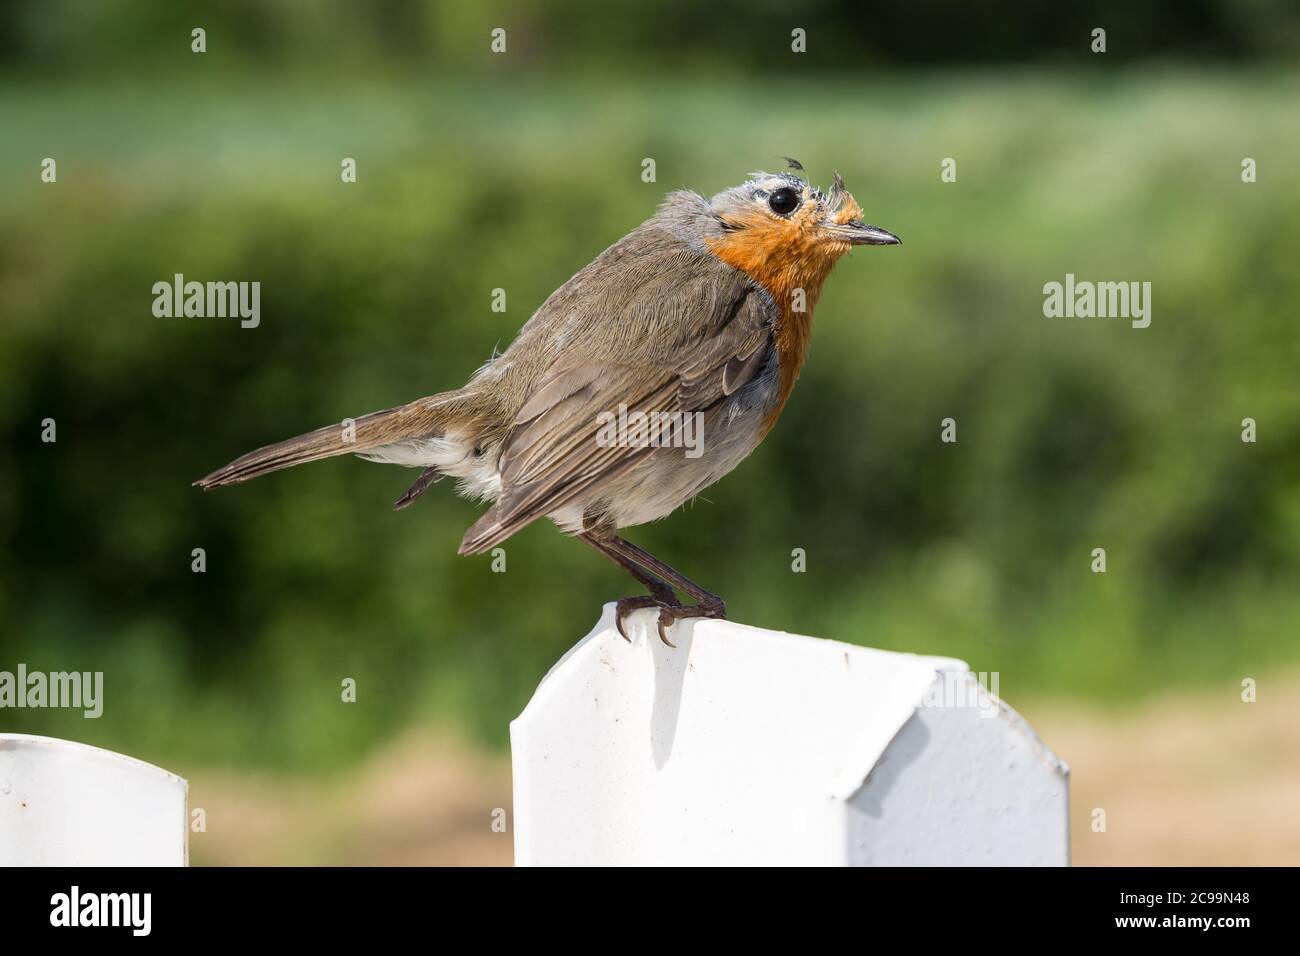 Bald-headed robin in moult sitting on a fence post Stock Photo